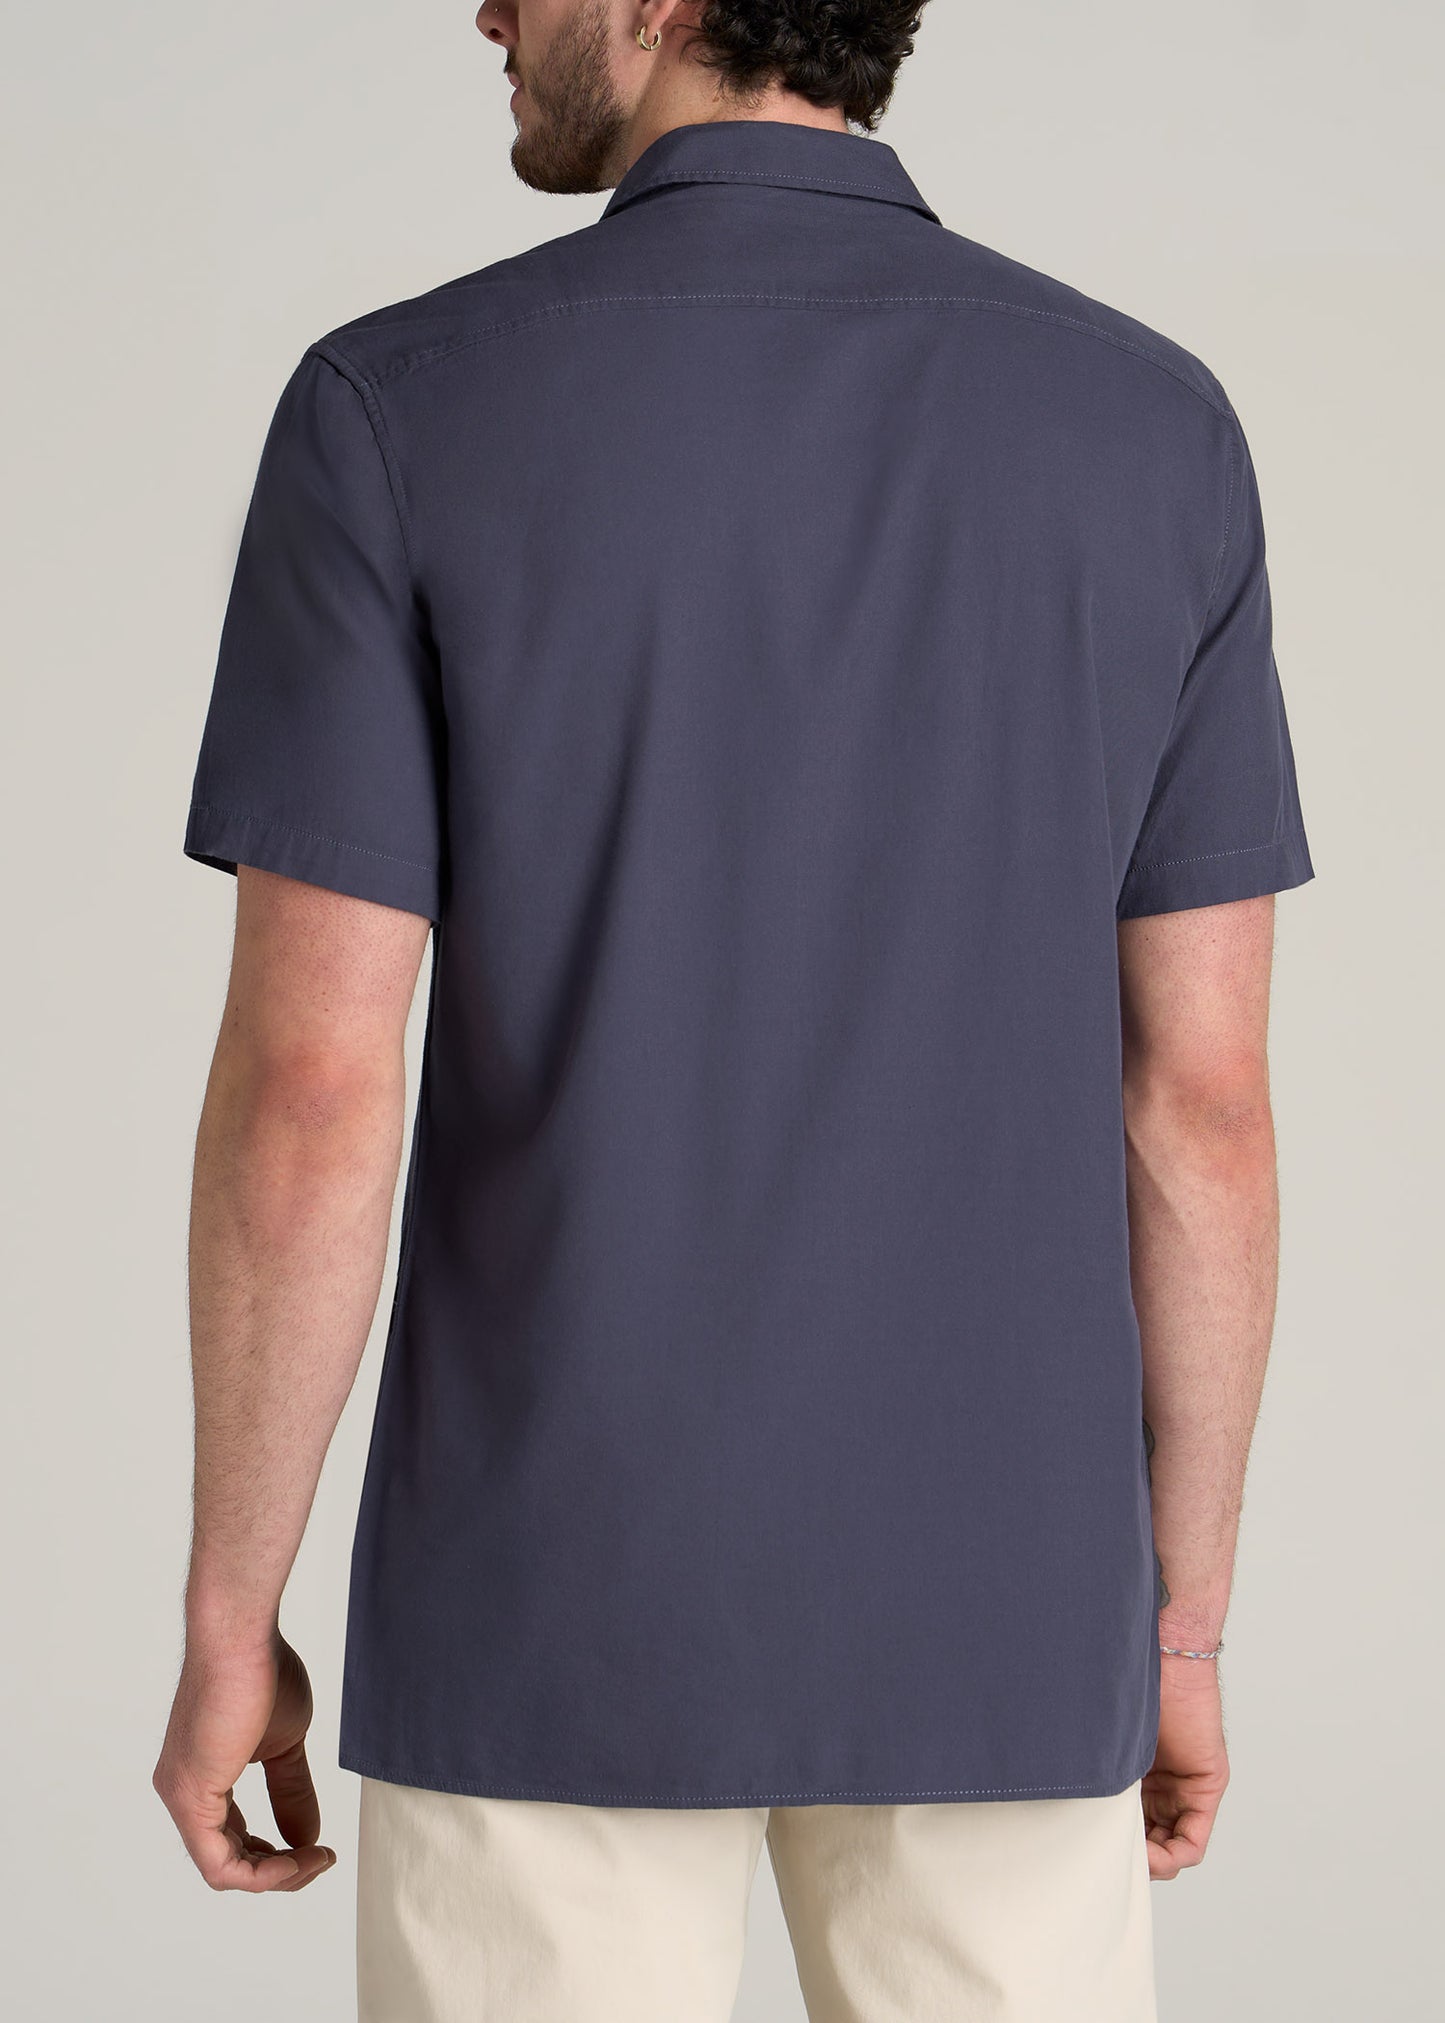 American-Tall-Men-Two-Pocket-Camp-Shirt-Weathered-Navy-back